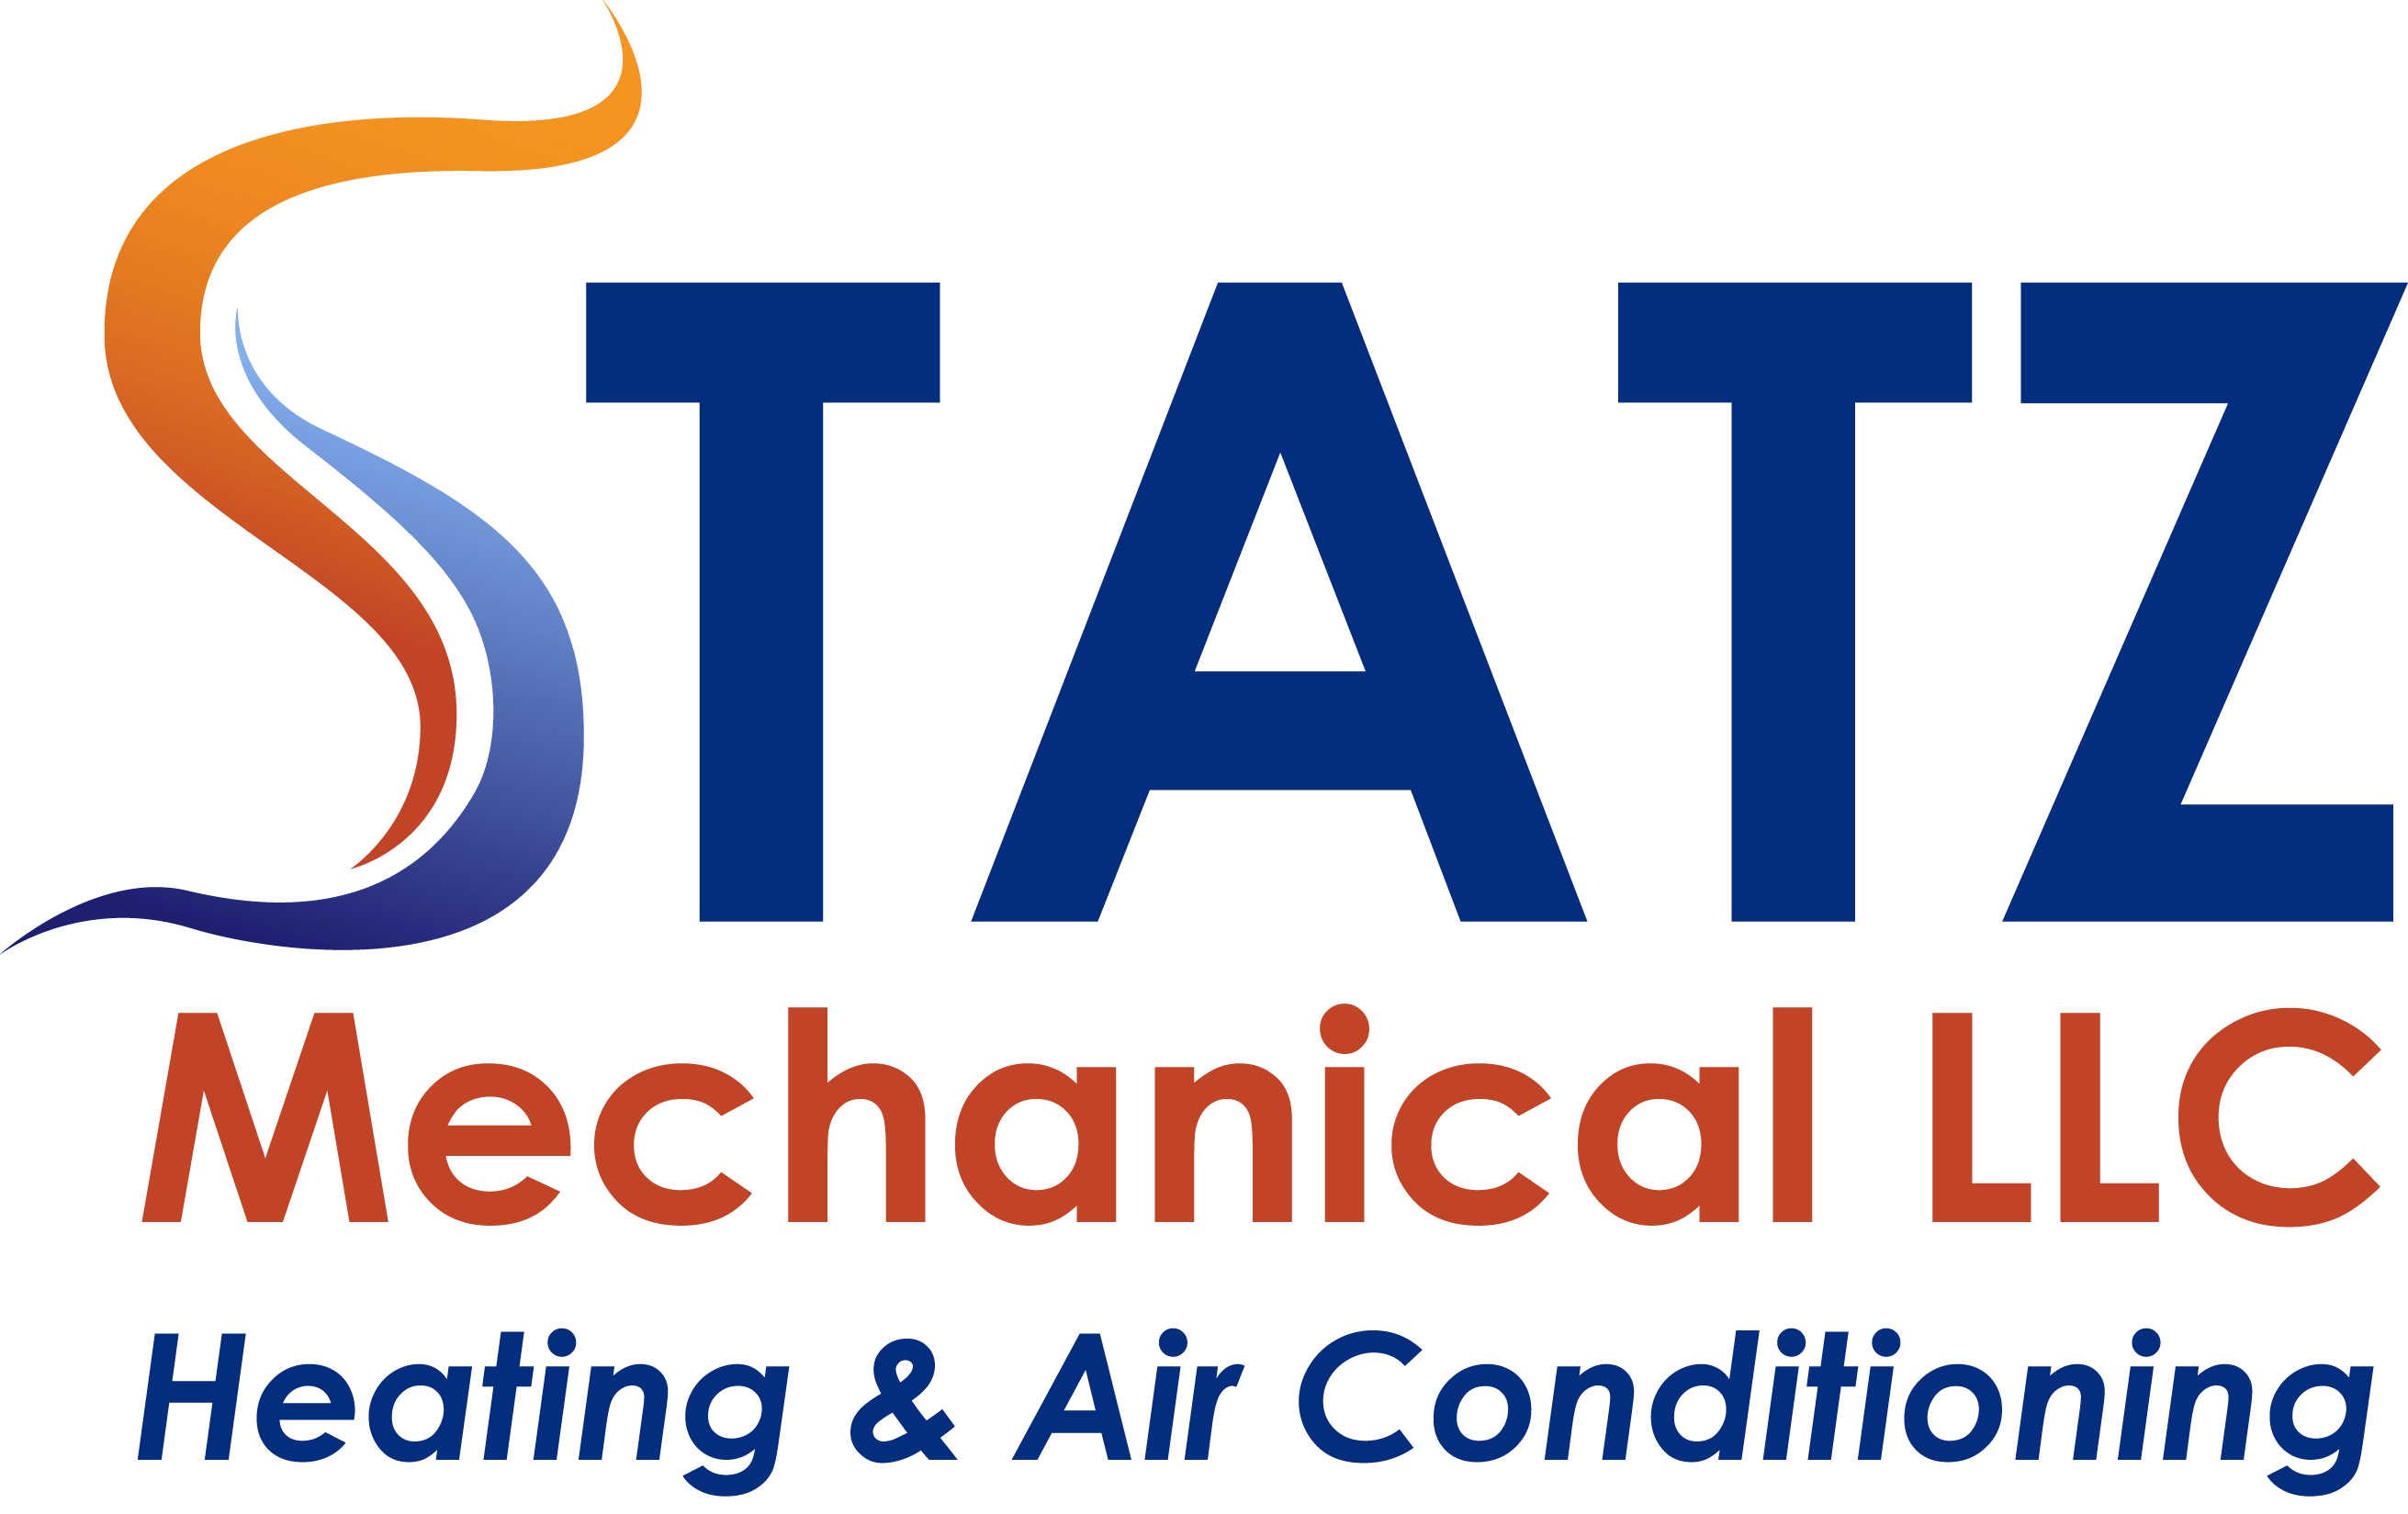 Get your Amana Furnace units service done in Baraboo WI by Statz Mechanical LLC 